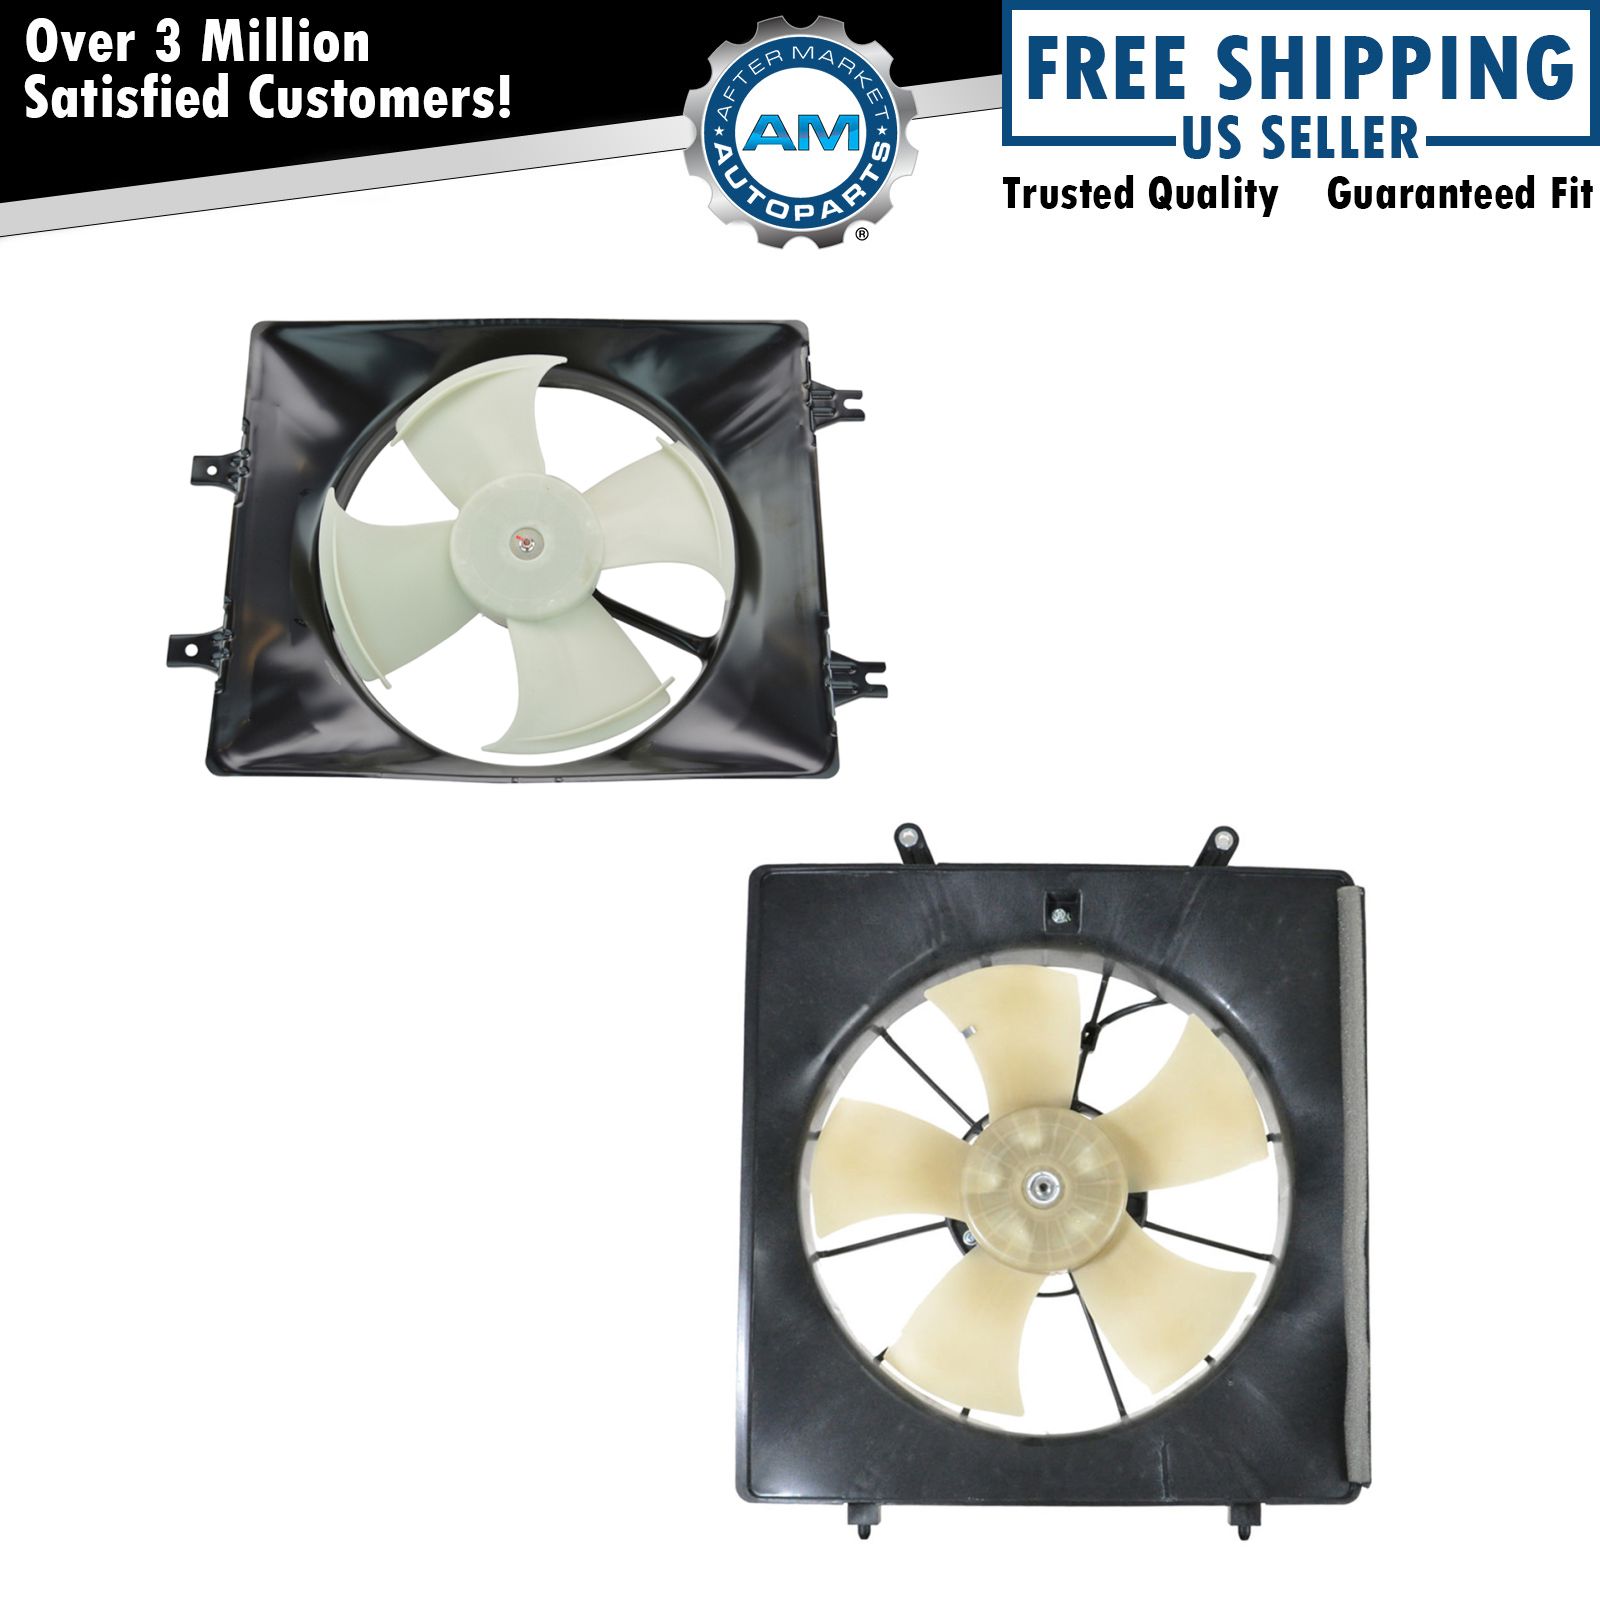 2pc Radiator Cooling Fan & A/C Condenser Cooling Fan Kit for Honda Odyssey